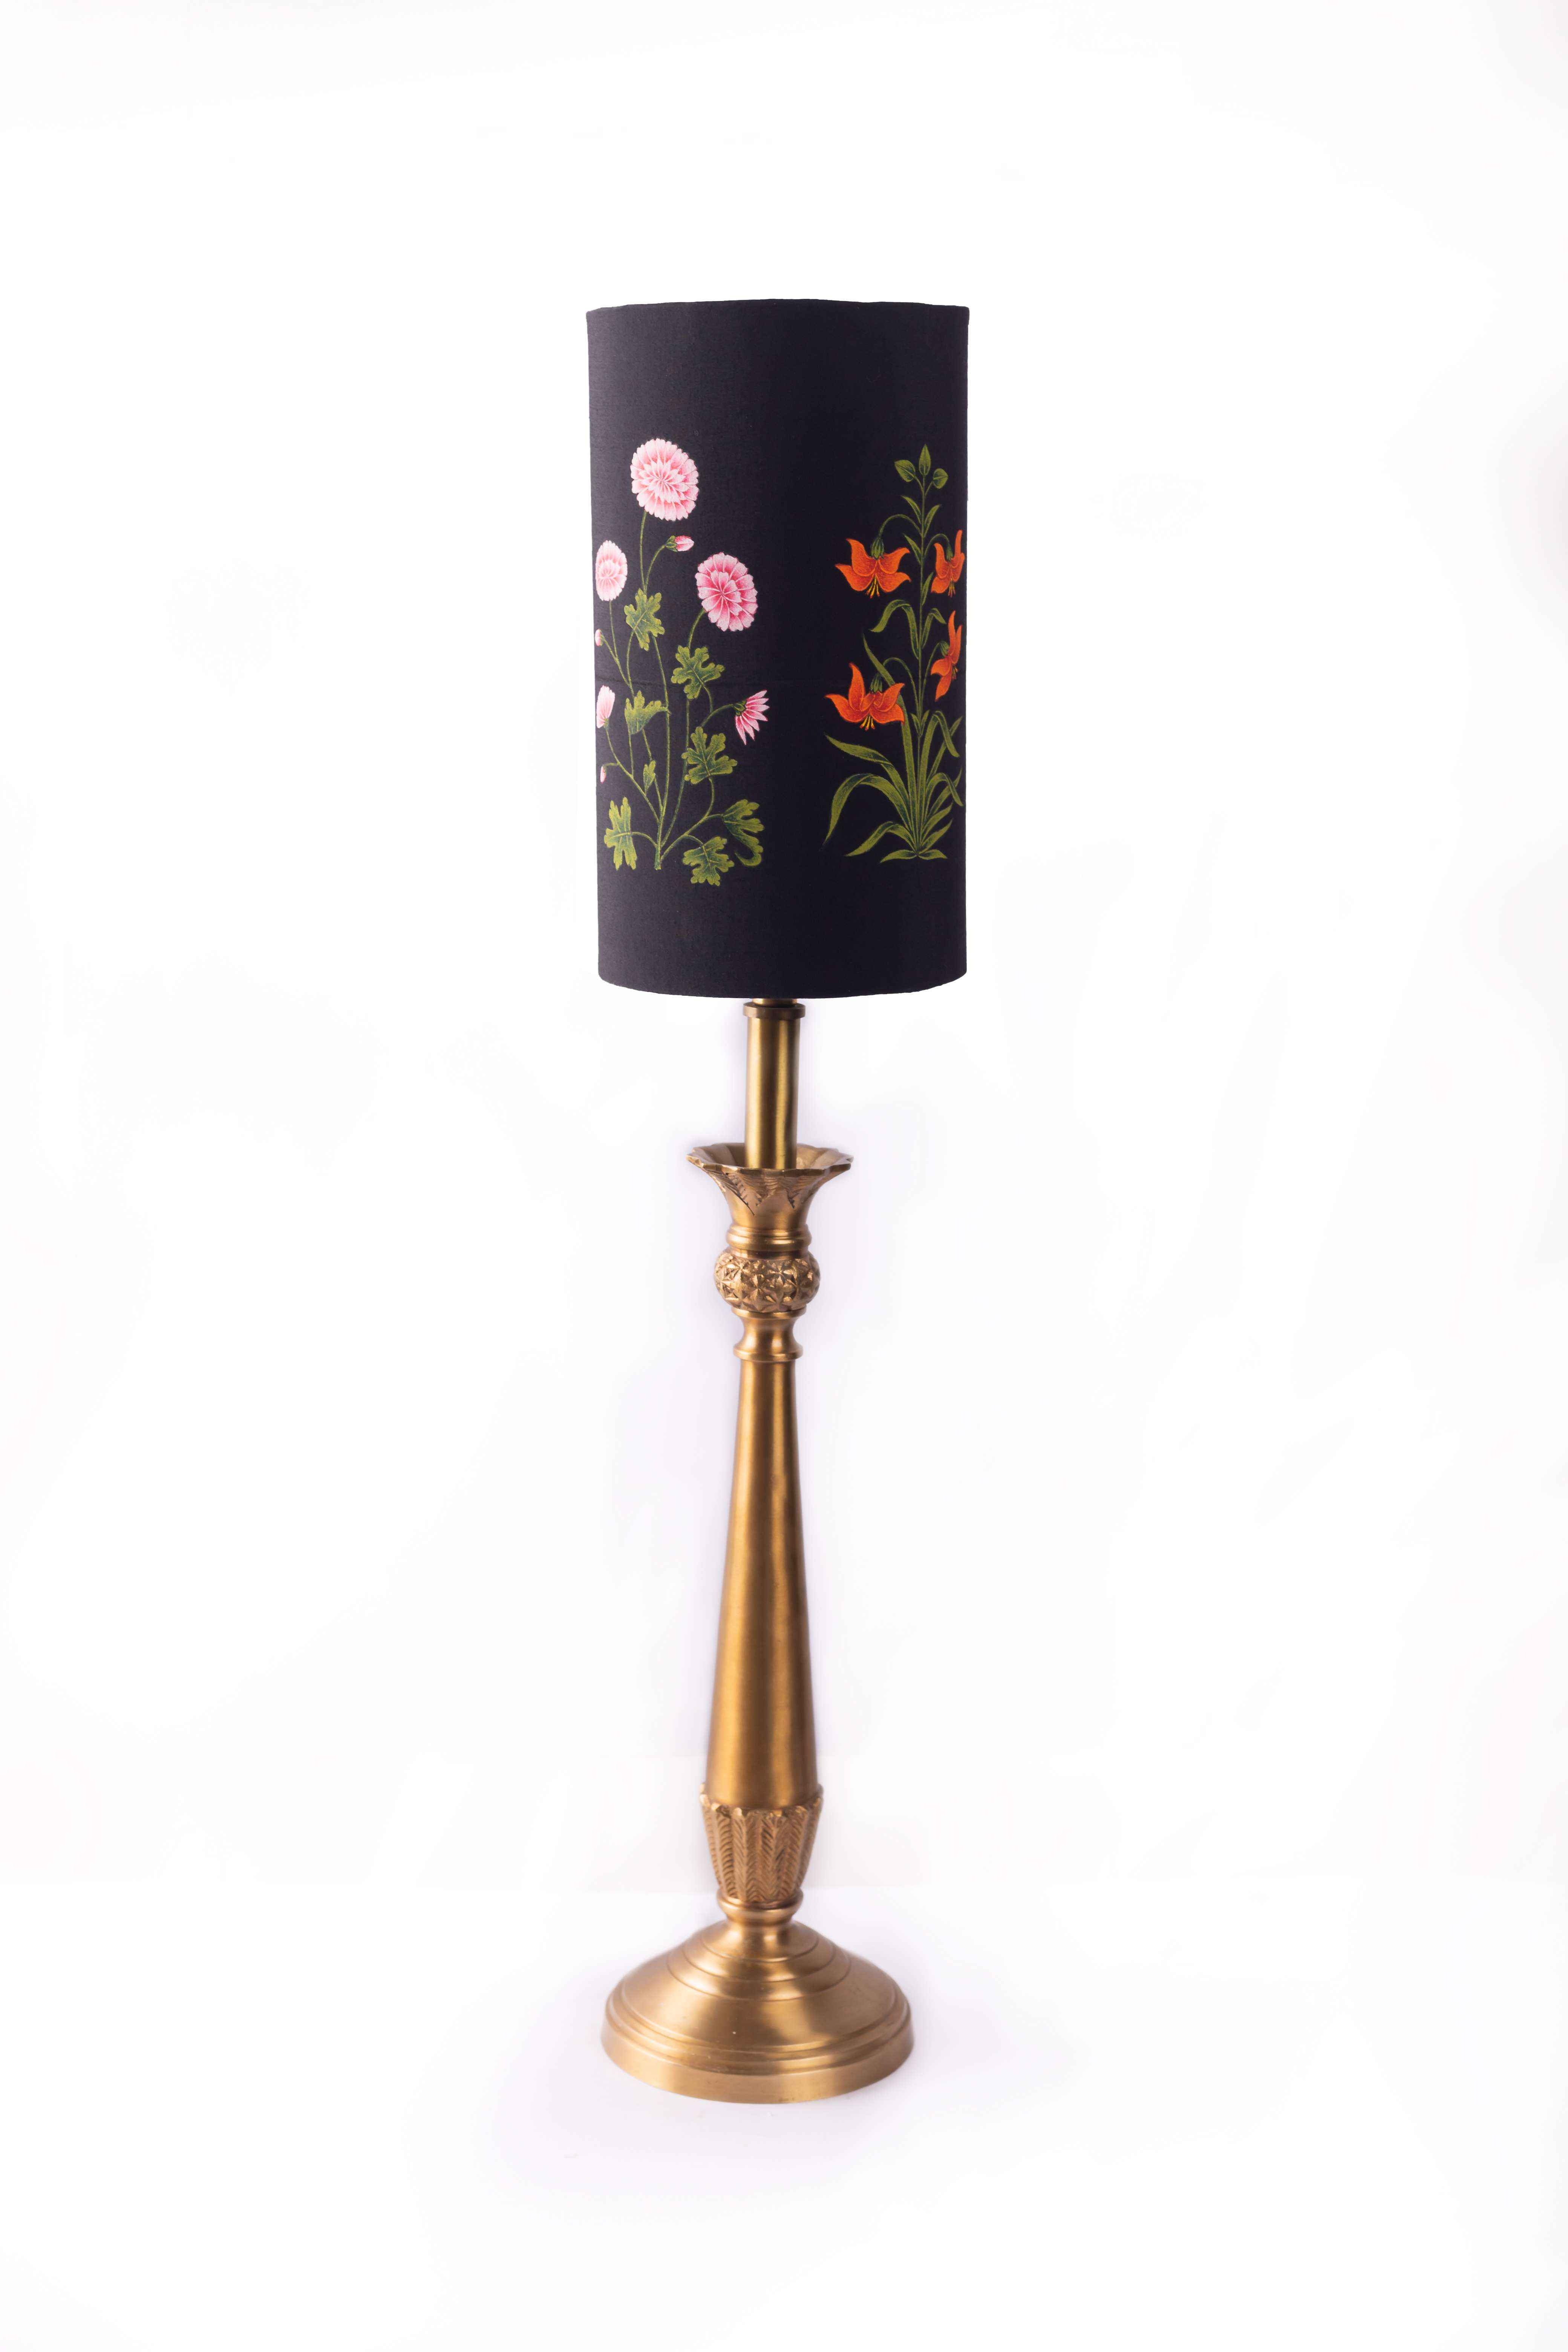 Table Lampshades With Handpainted Artwork 15